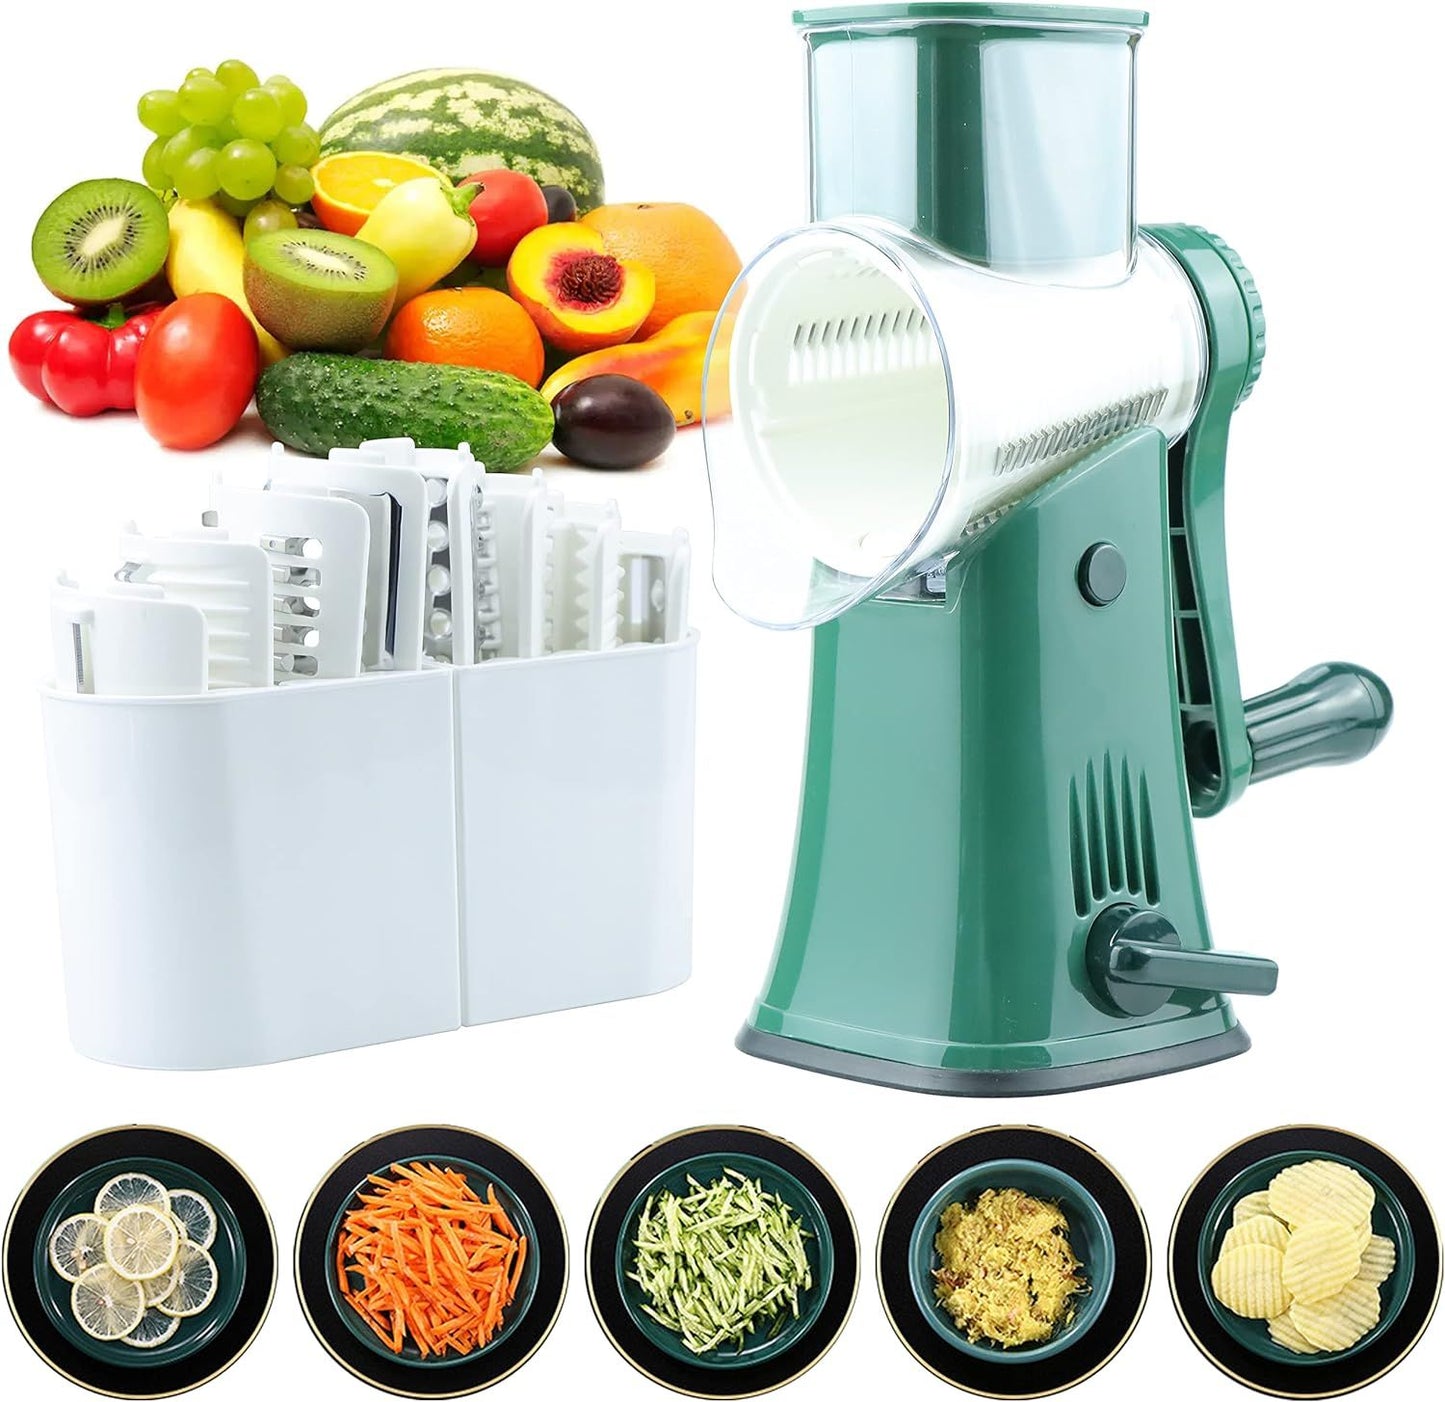 Rotary Cheese Grater And Shredder, Efficient Vegetable Cutter W/ Handle-5-In-1